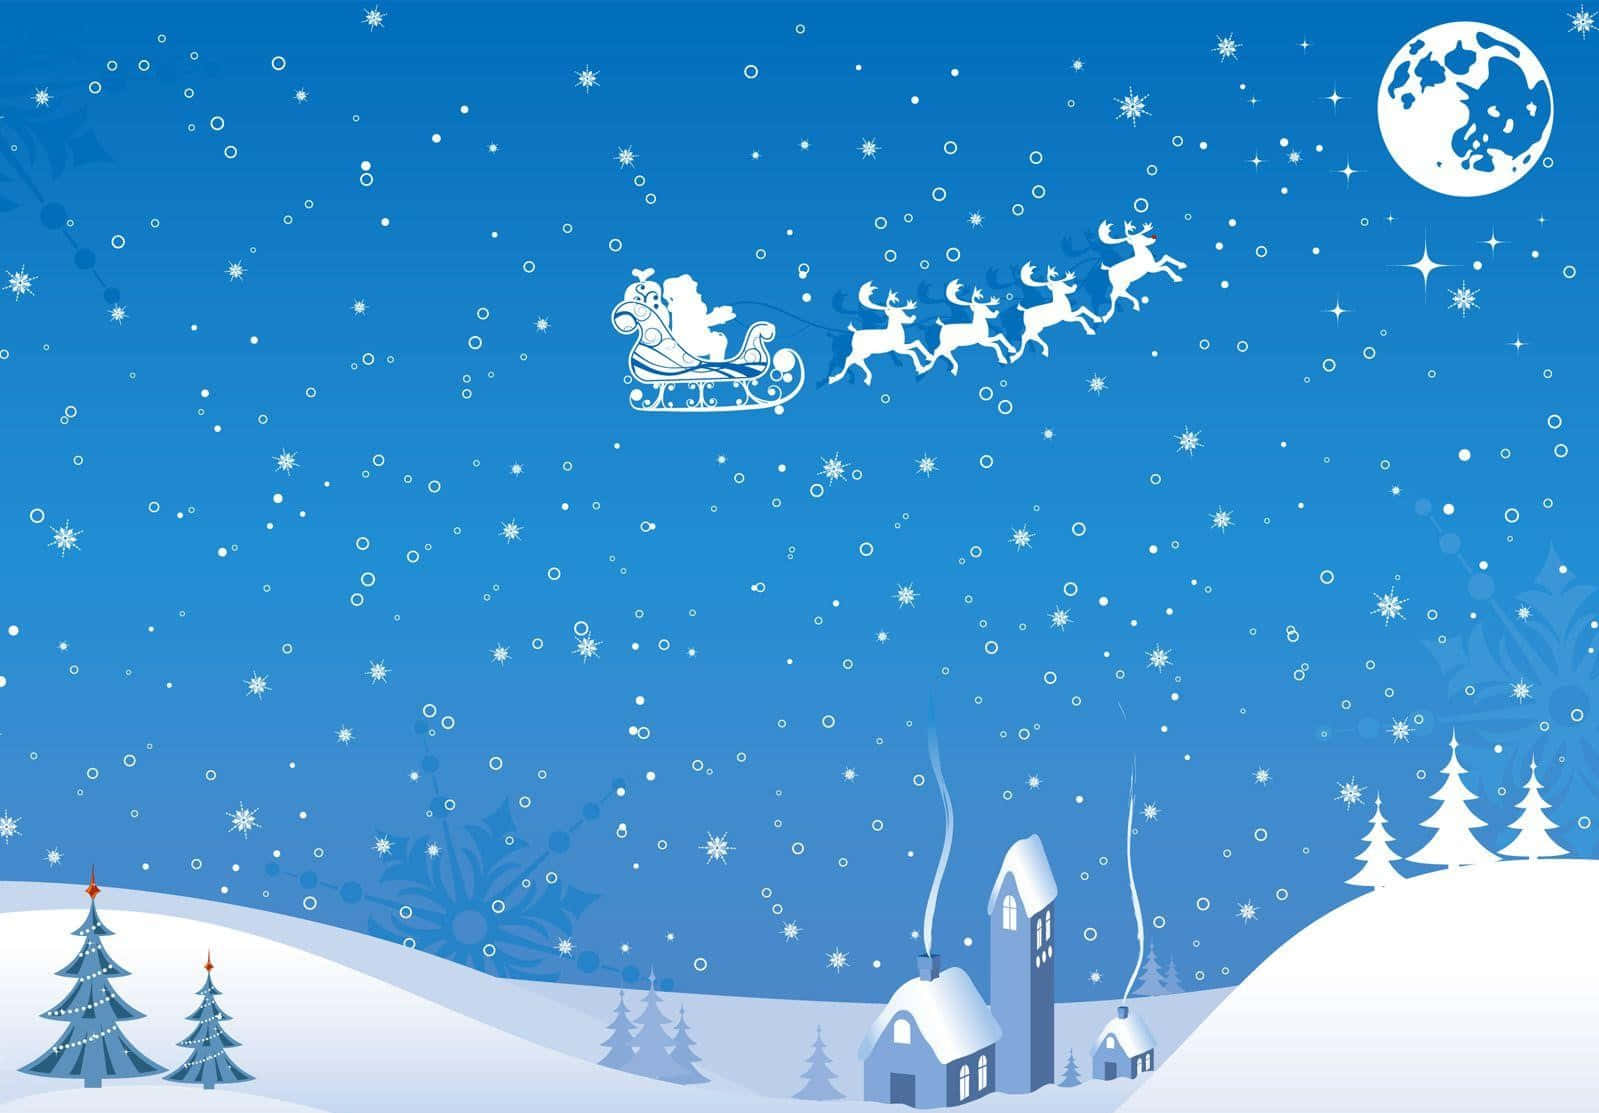 Have A Cool Christmas This Year! Background